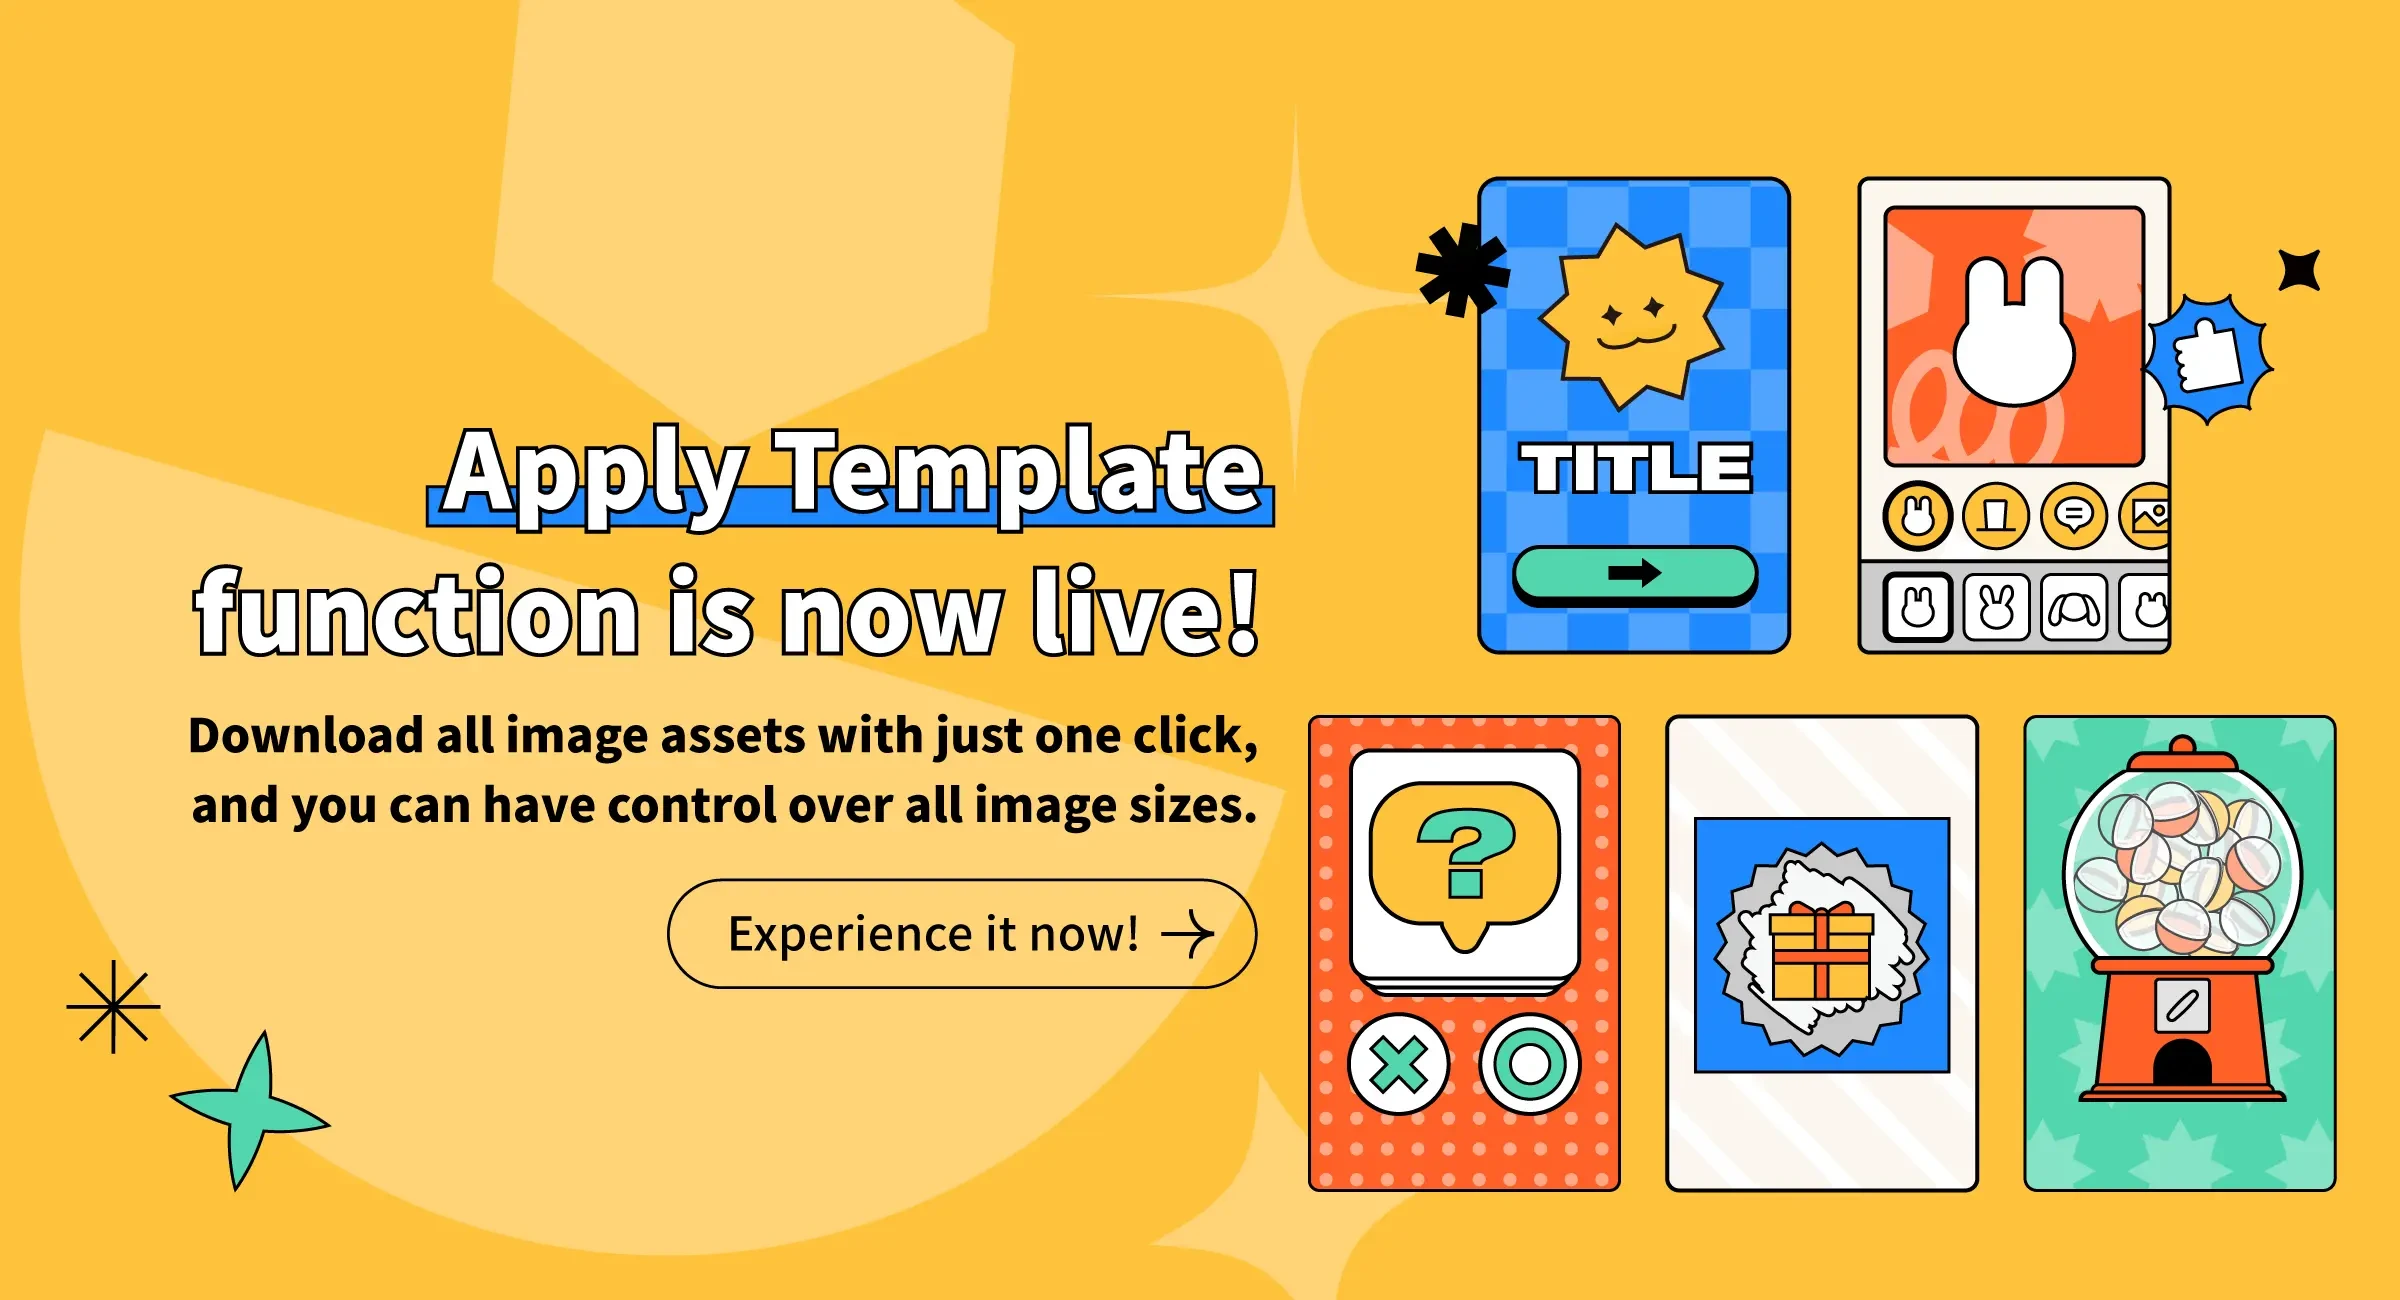 Apply Template function is now live! Download all image assets with just one click, and you can have control over all image sizes.